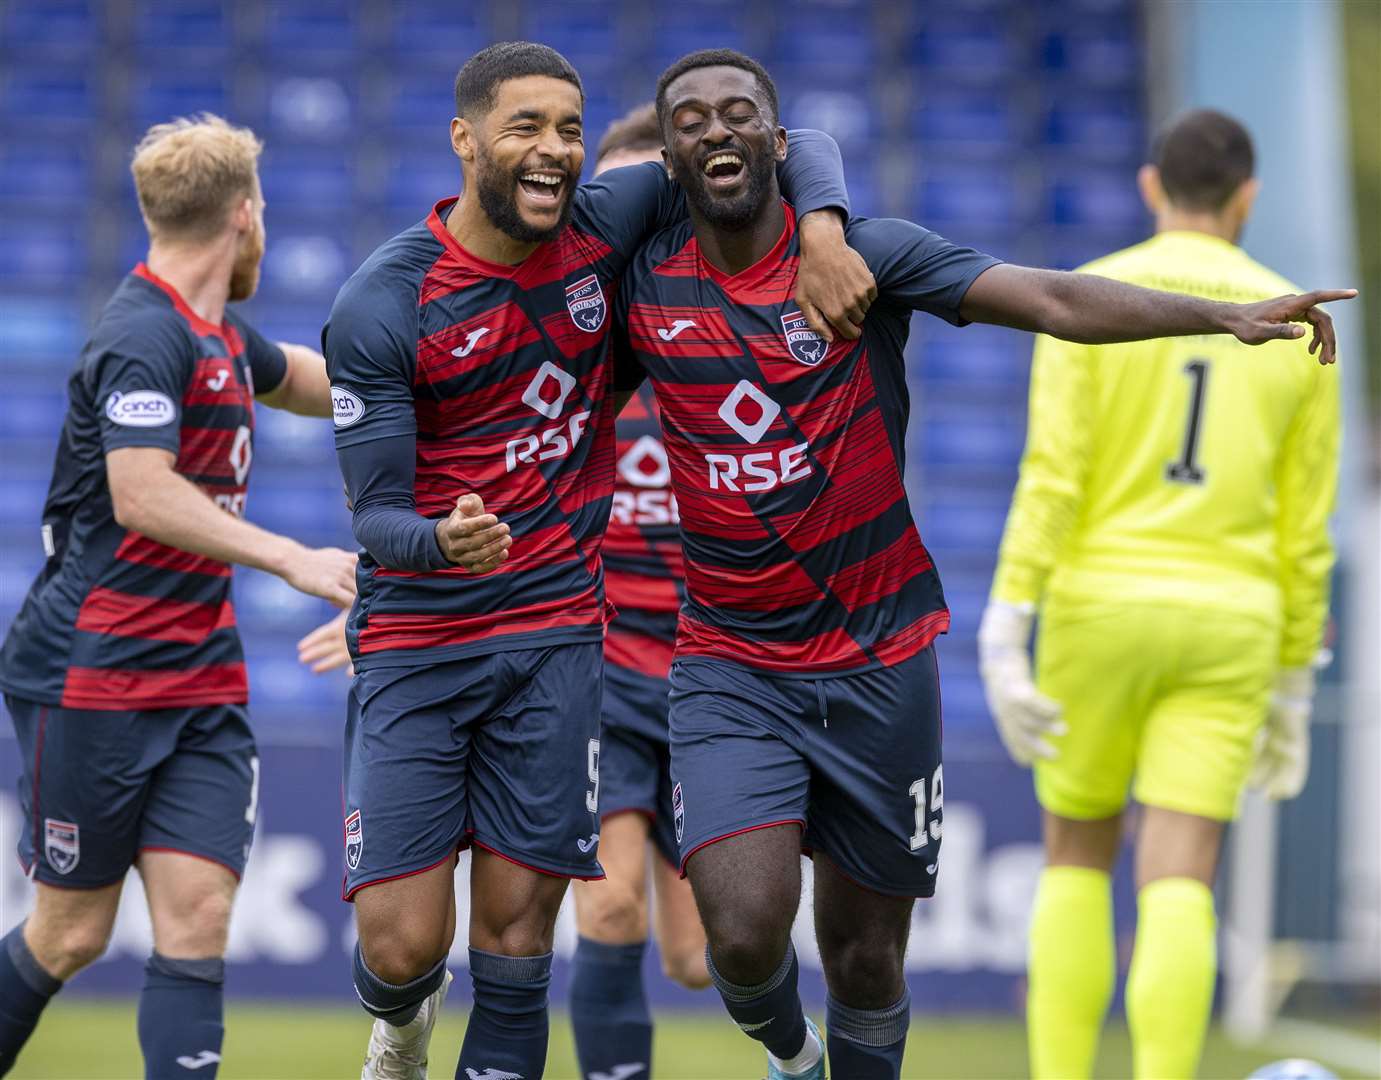 Picture - Ken Macpherson. Premier Sports Cup (Group Stage) Ross County(1) v Dunfermline(0). 16.07.22. Ross County's Jordy Hiwula celebrates his goal.